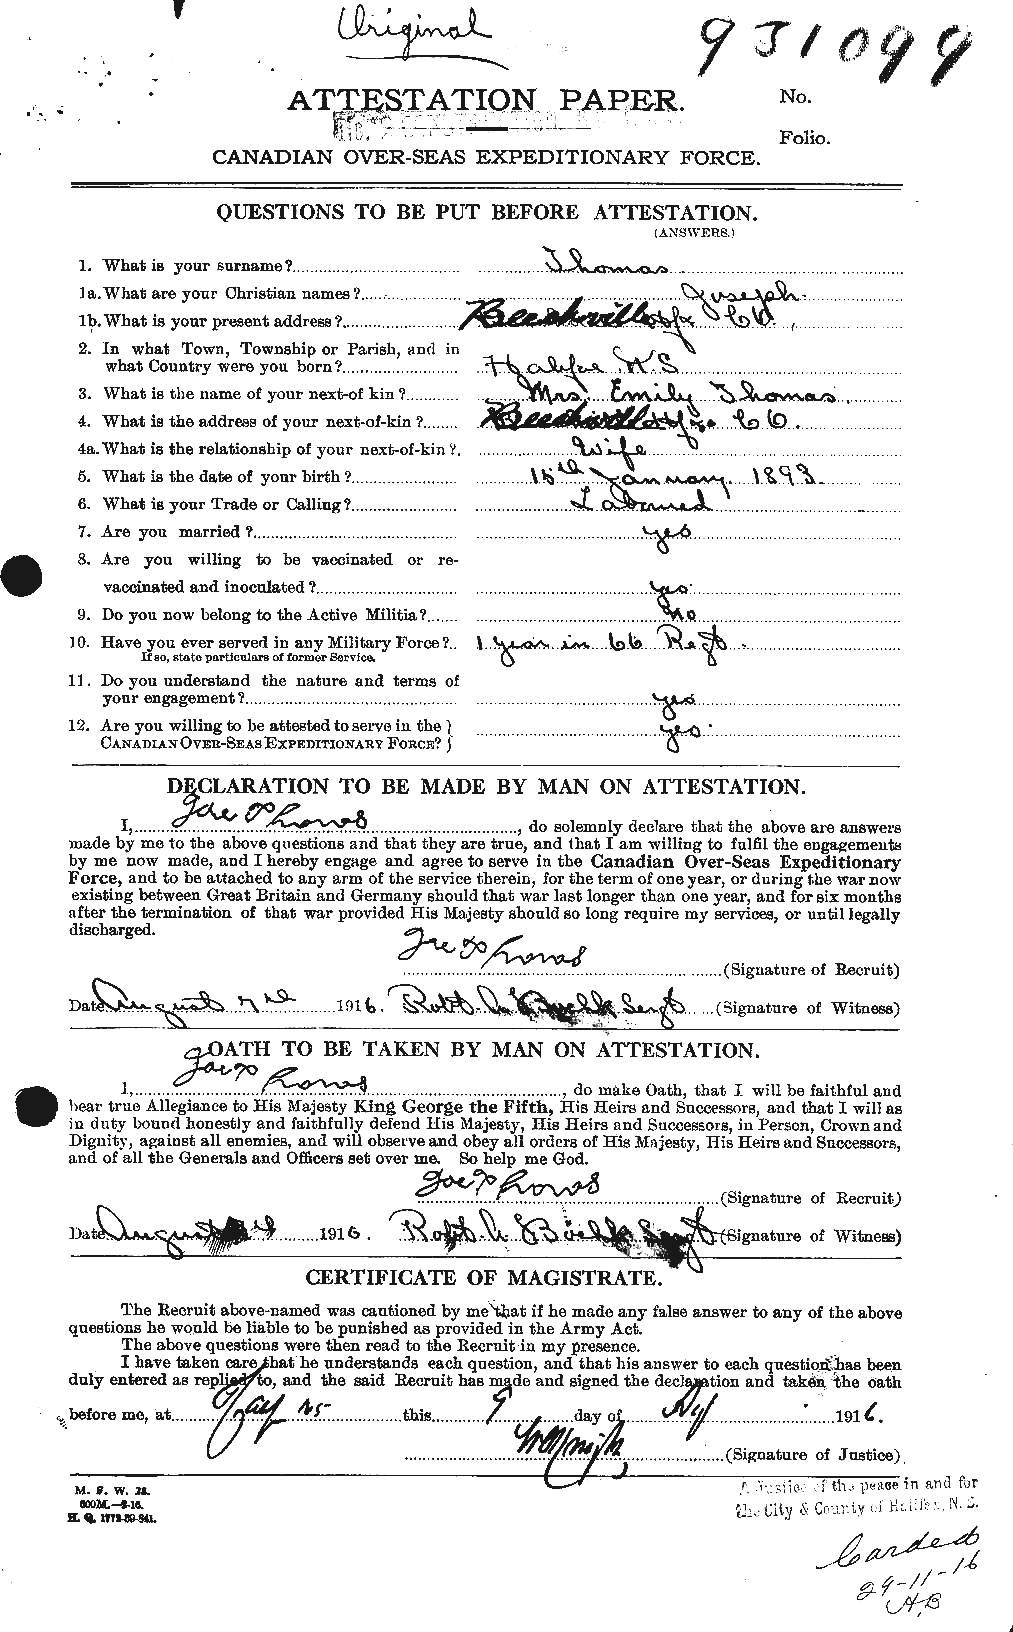 Personnel Records of the First World War - CEF 632479a